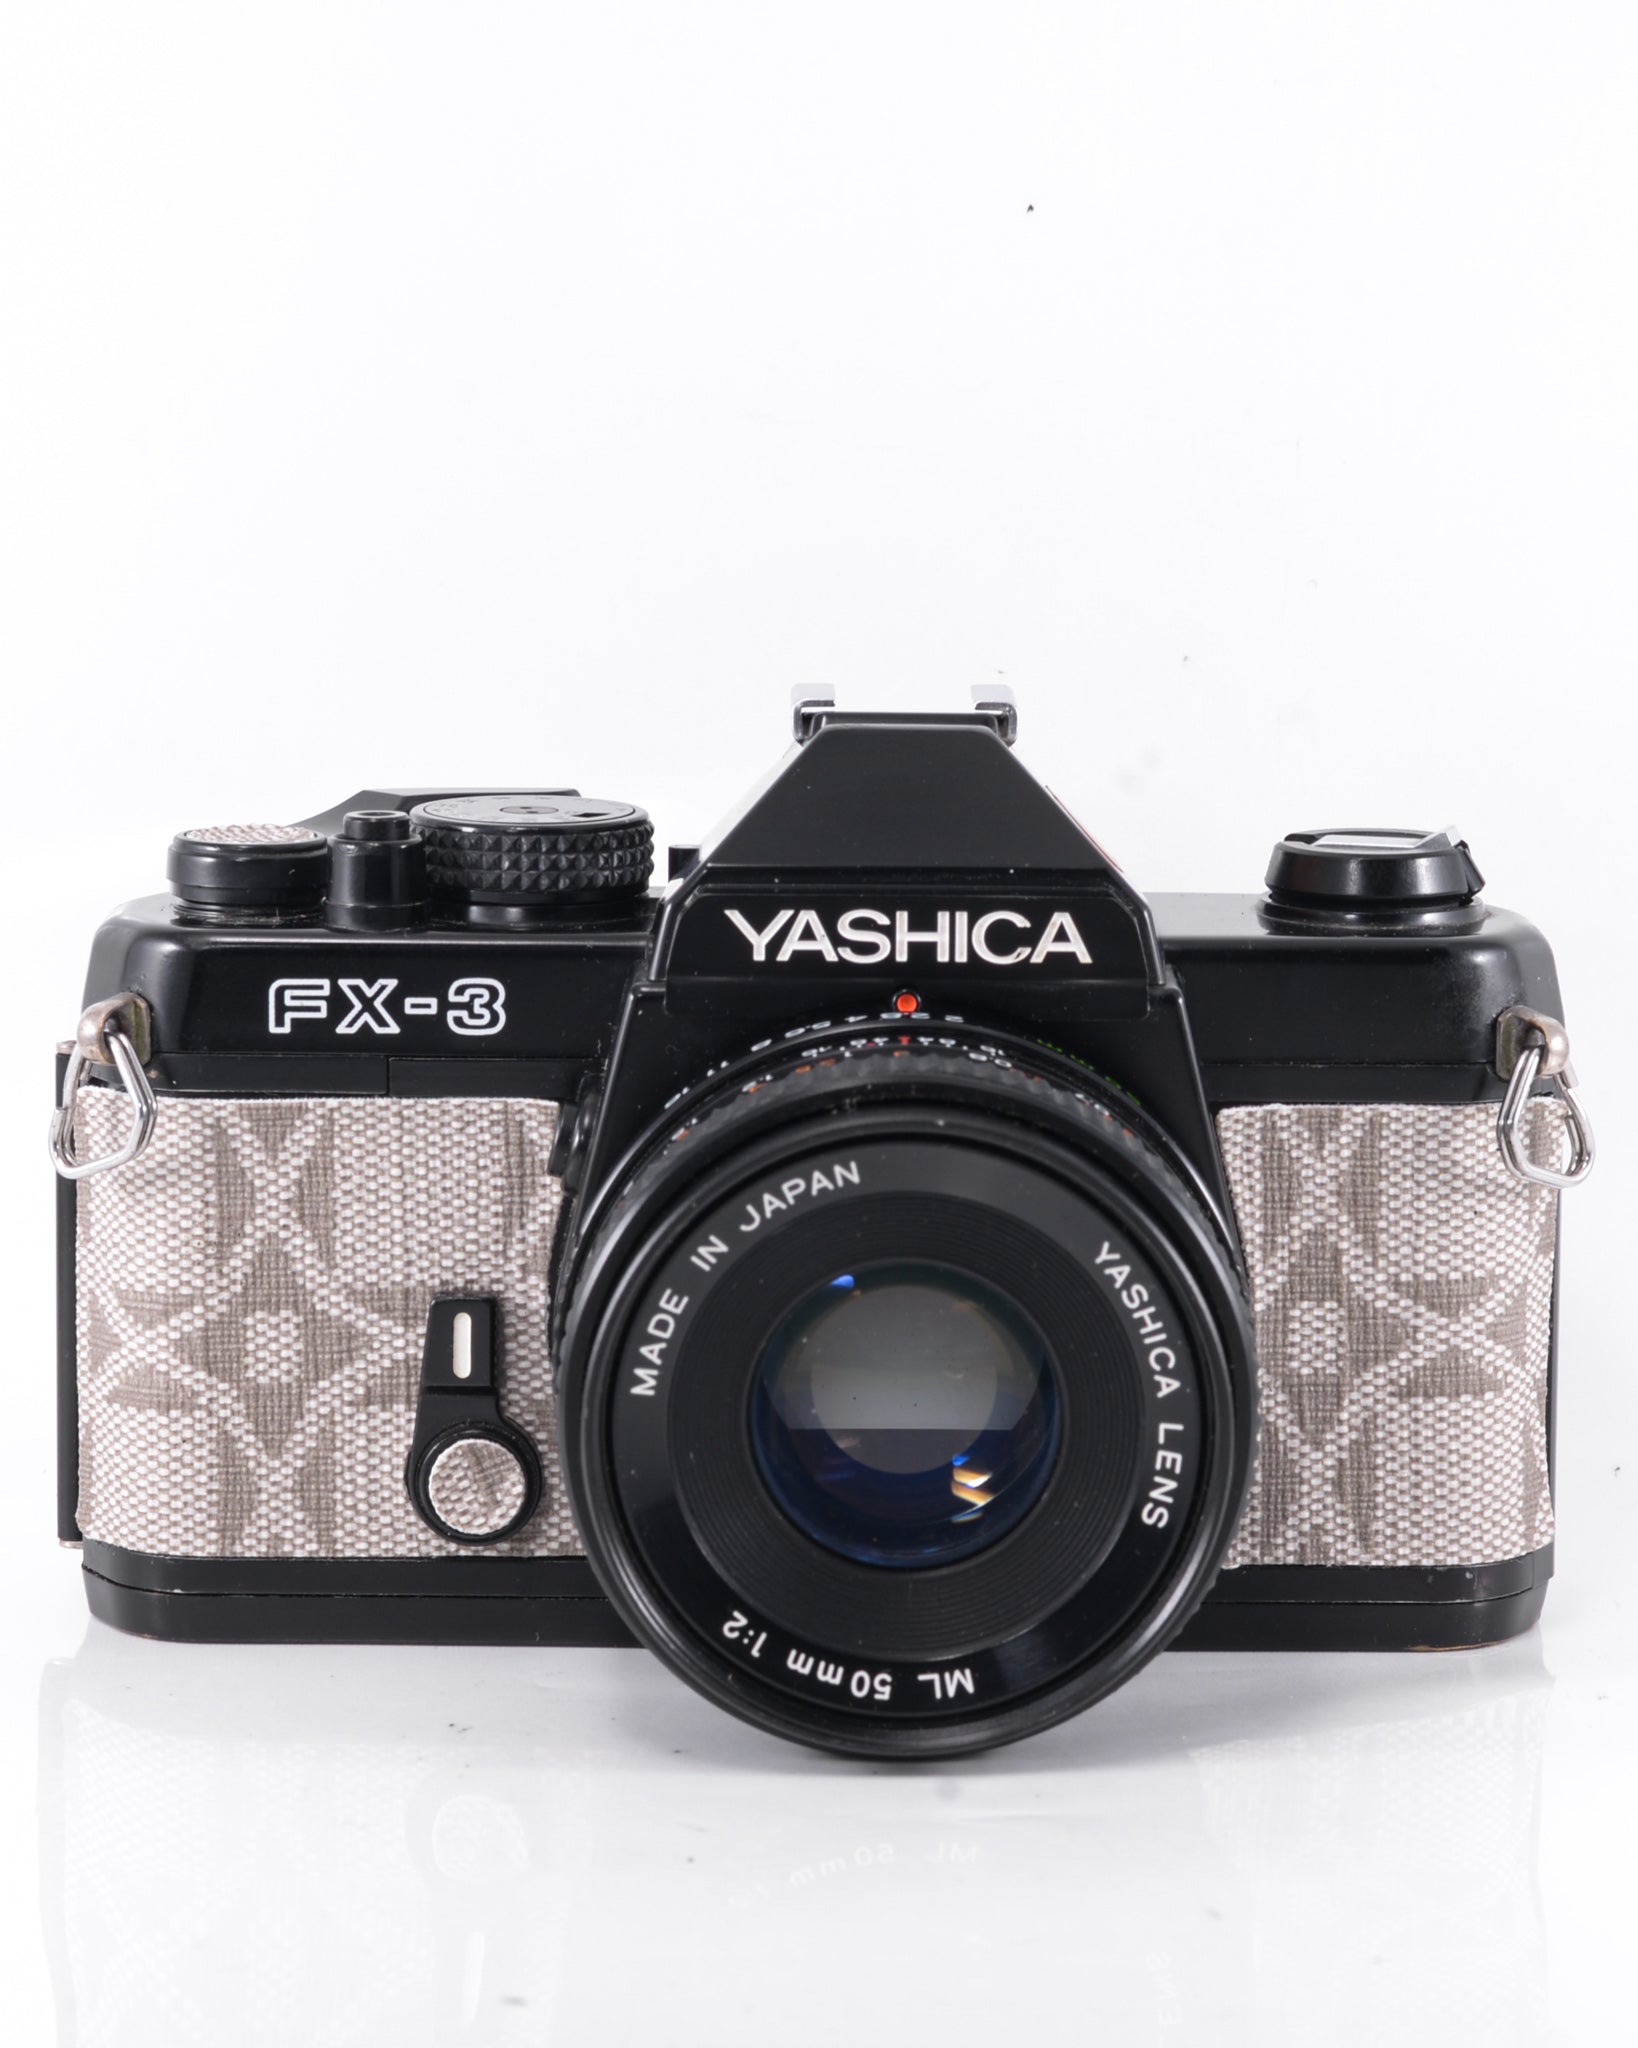 BOXED Yashica FX-3 35mm SLR film camera with 50mm f2 lens